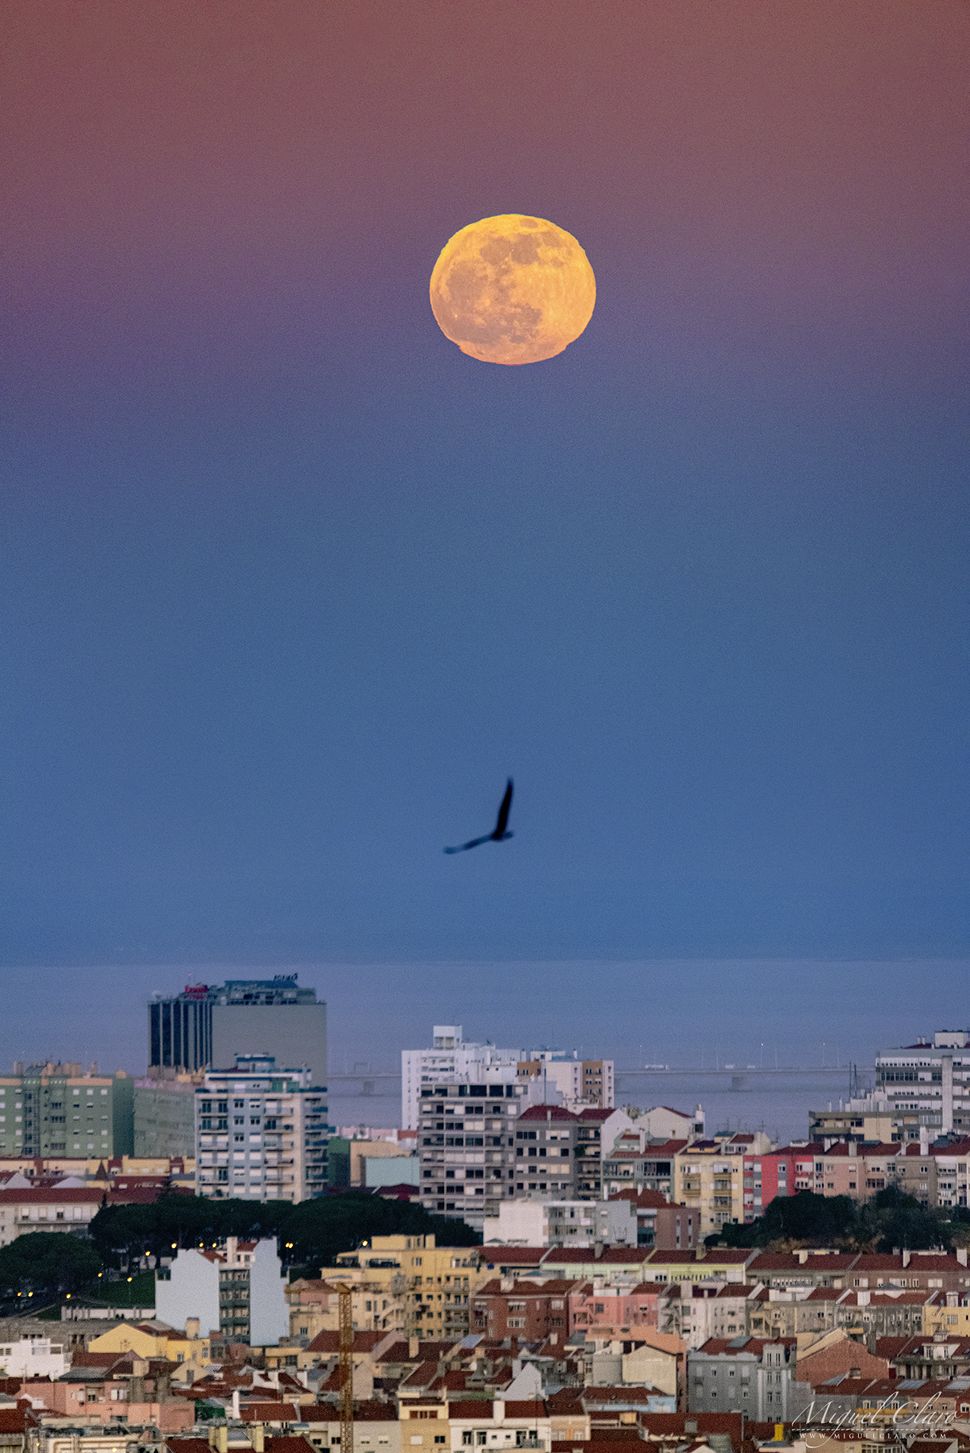 Full moon and the 'Belt of Venus' glow over Lisbon during 1st eclipse of 2020 (photo)